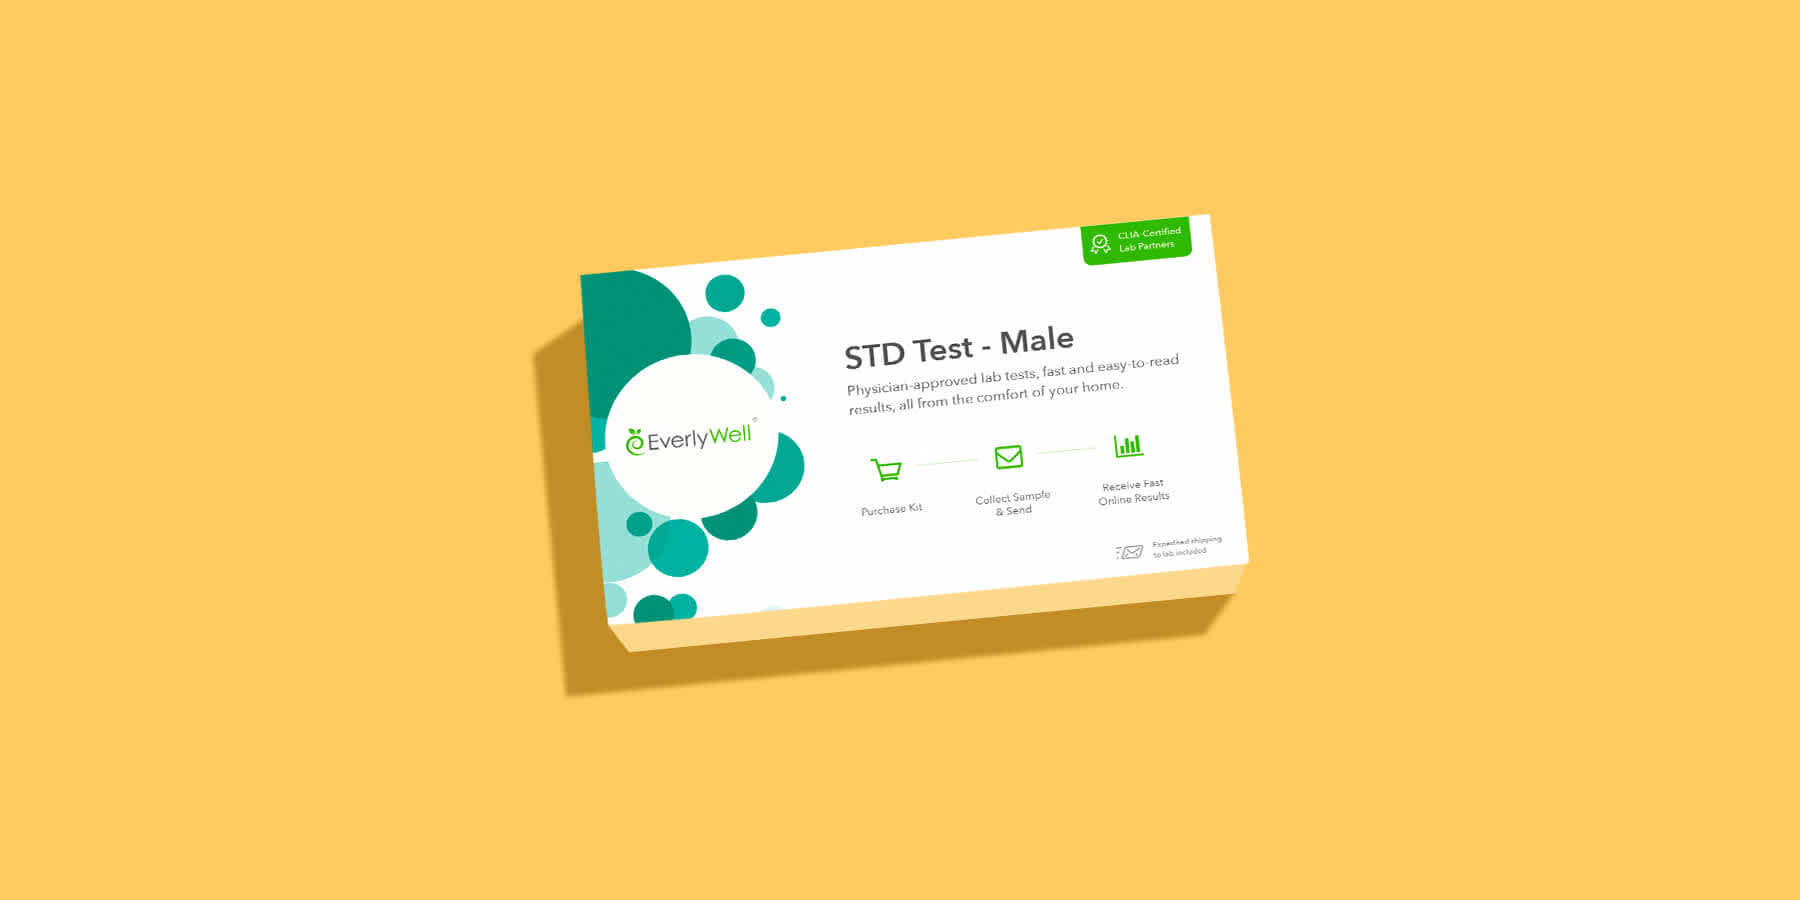 How often should you get tested for STDs?